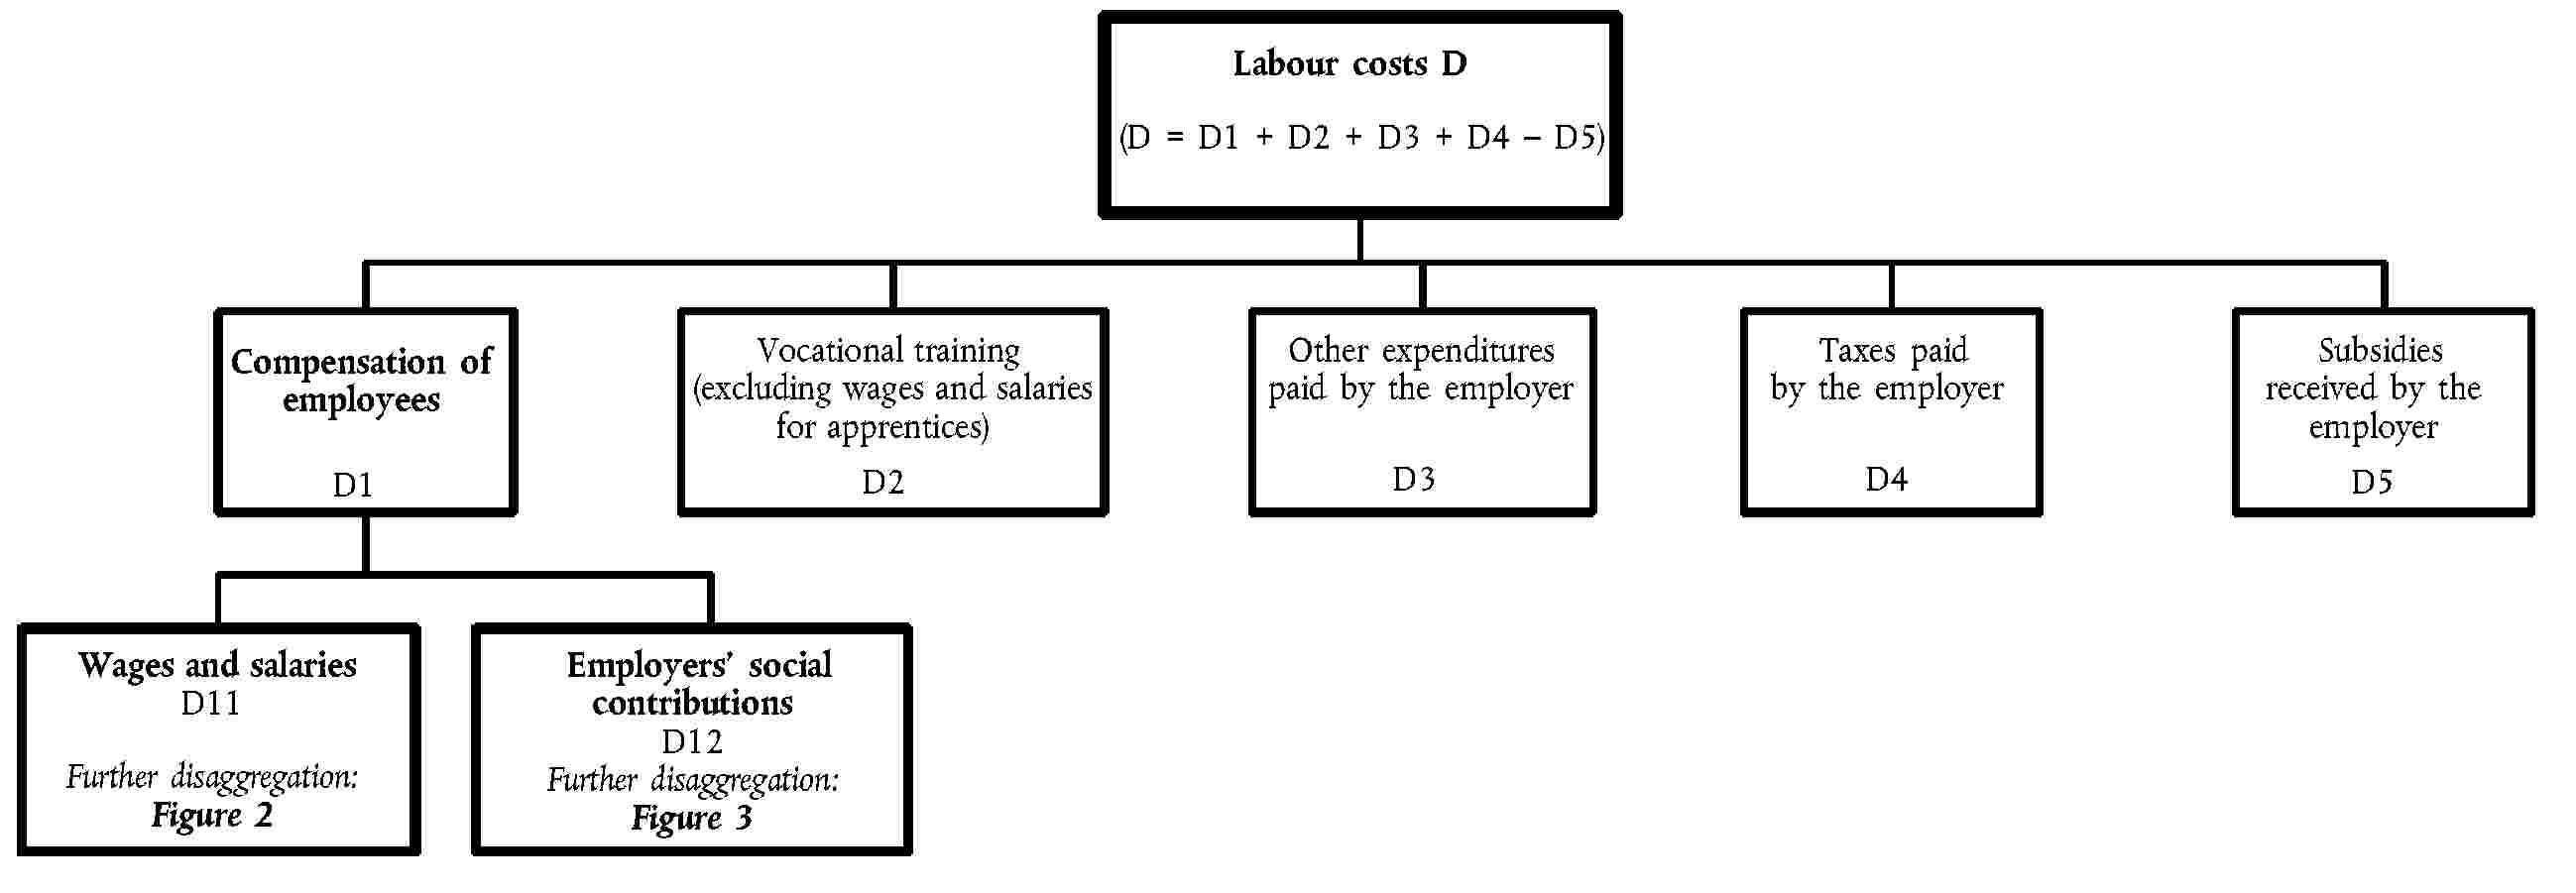 Labour costs D(D = D1 + D2 + D3 + D4 – D5)Compensation of employeesD1Vocational training(excluding wages and salaries for apprentices)D2Other expenditures paid by the employerD3Taxes paid by the employerD4Subsidies received by the employerD5Wages and salariesD11Further disaggregation:Figure 2Employers' social contributionsD12Further disaggregation:Figure 3